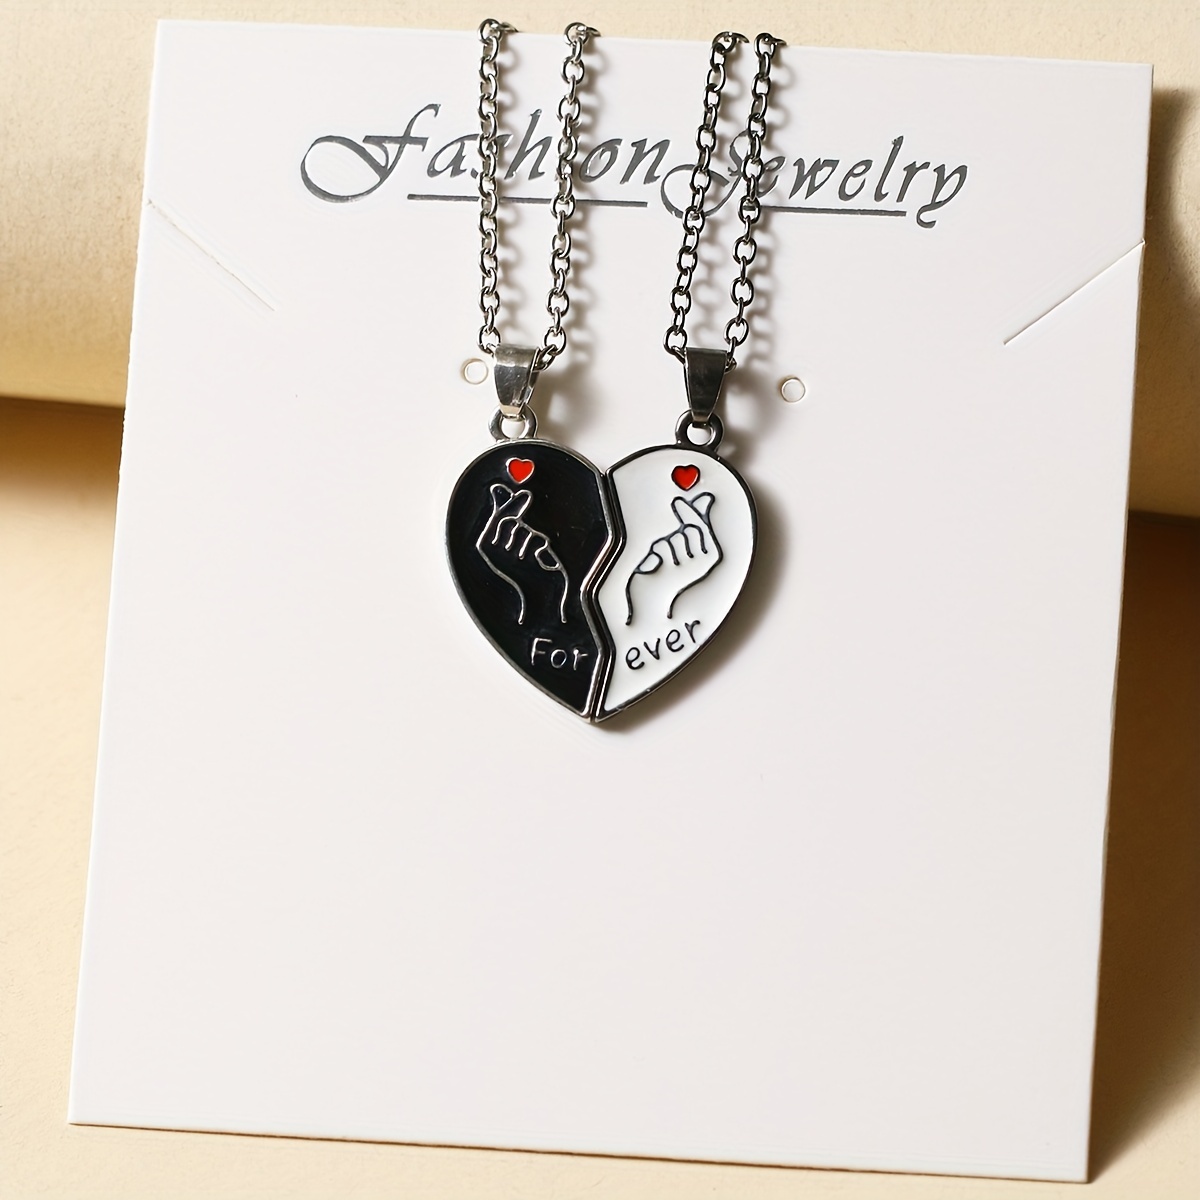 Heart Couples Necklaces Friendship Jewelry His Hers Puzzle Lock Key Pendant